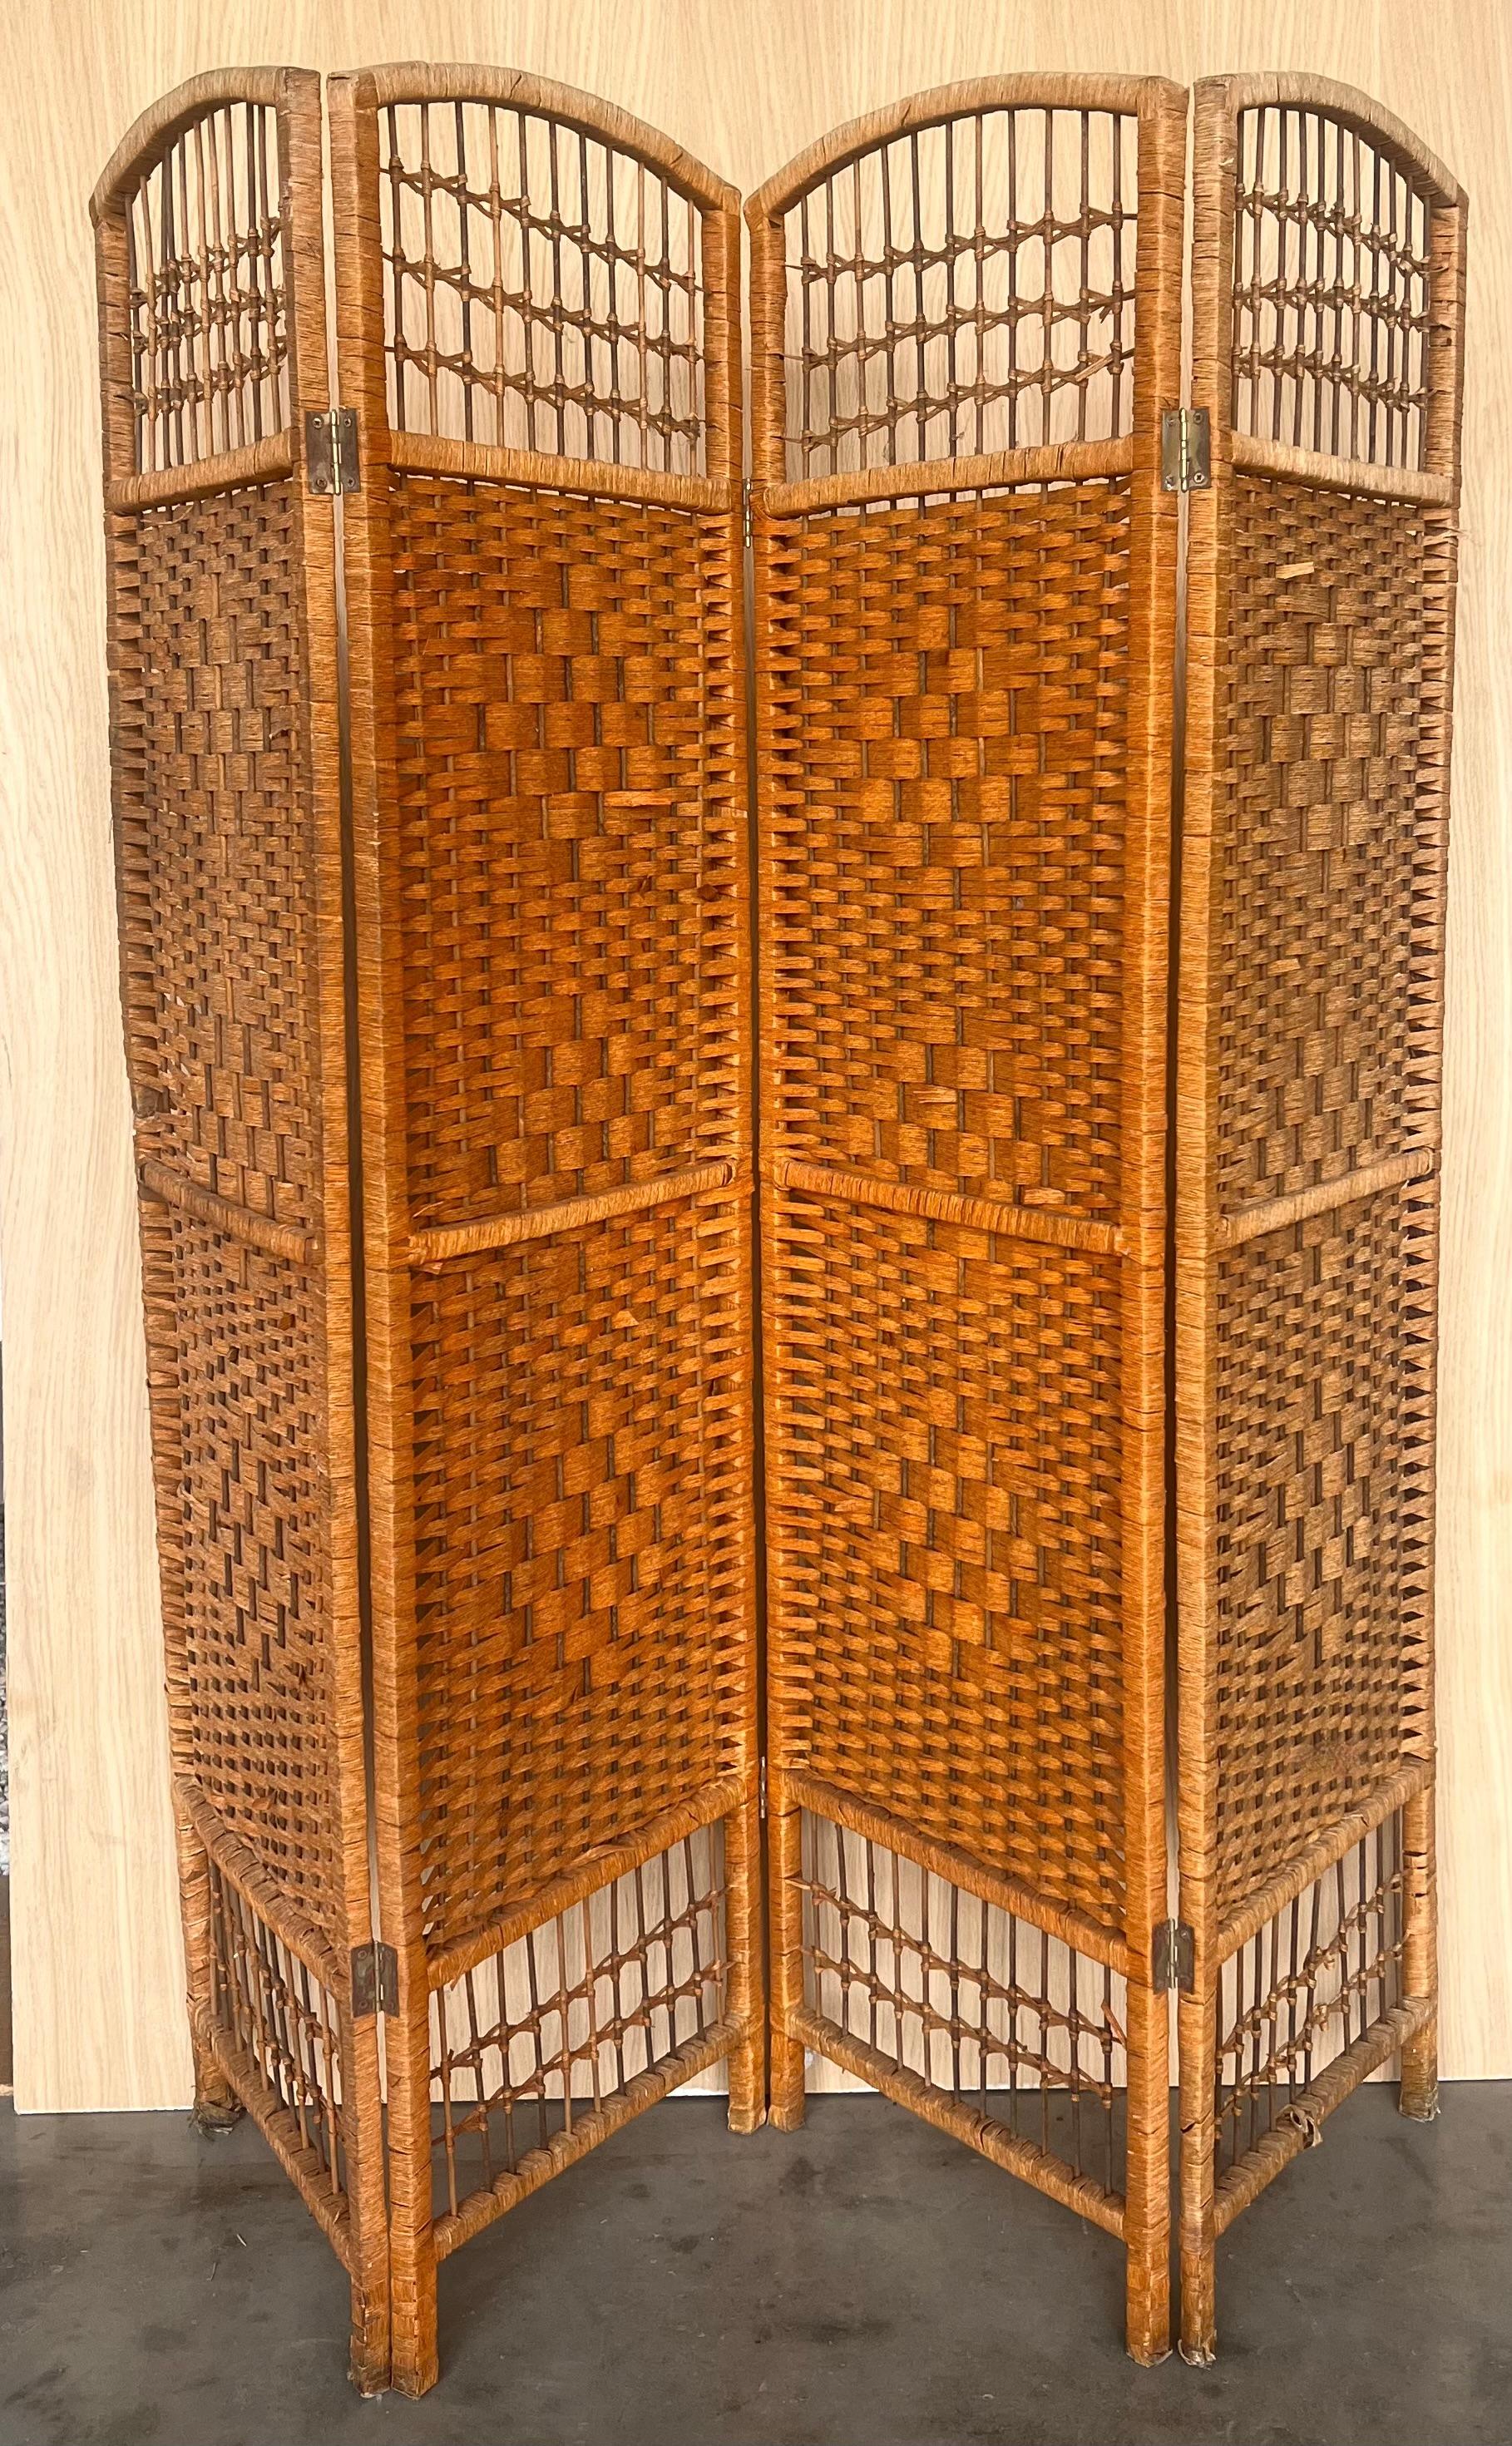 Mid-Century Modern Four-Panel Bamboo Wicker Rattan Folding Screen Room Divider, France 1960s For Sale